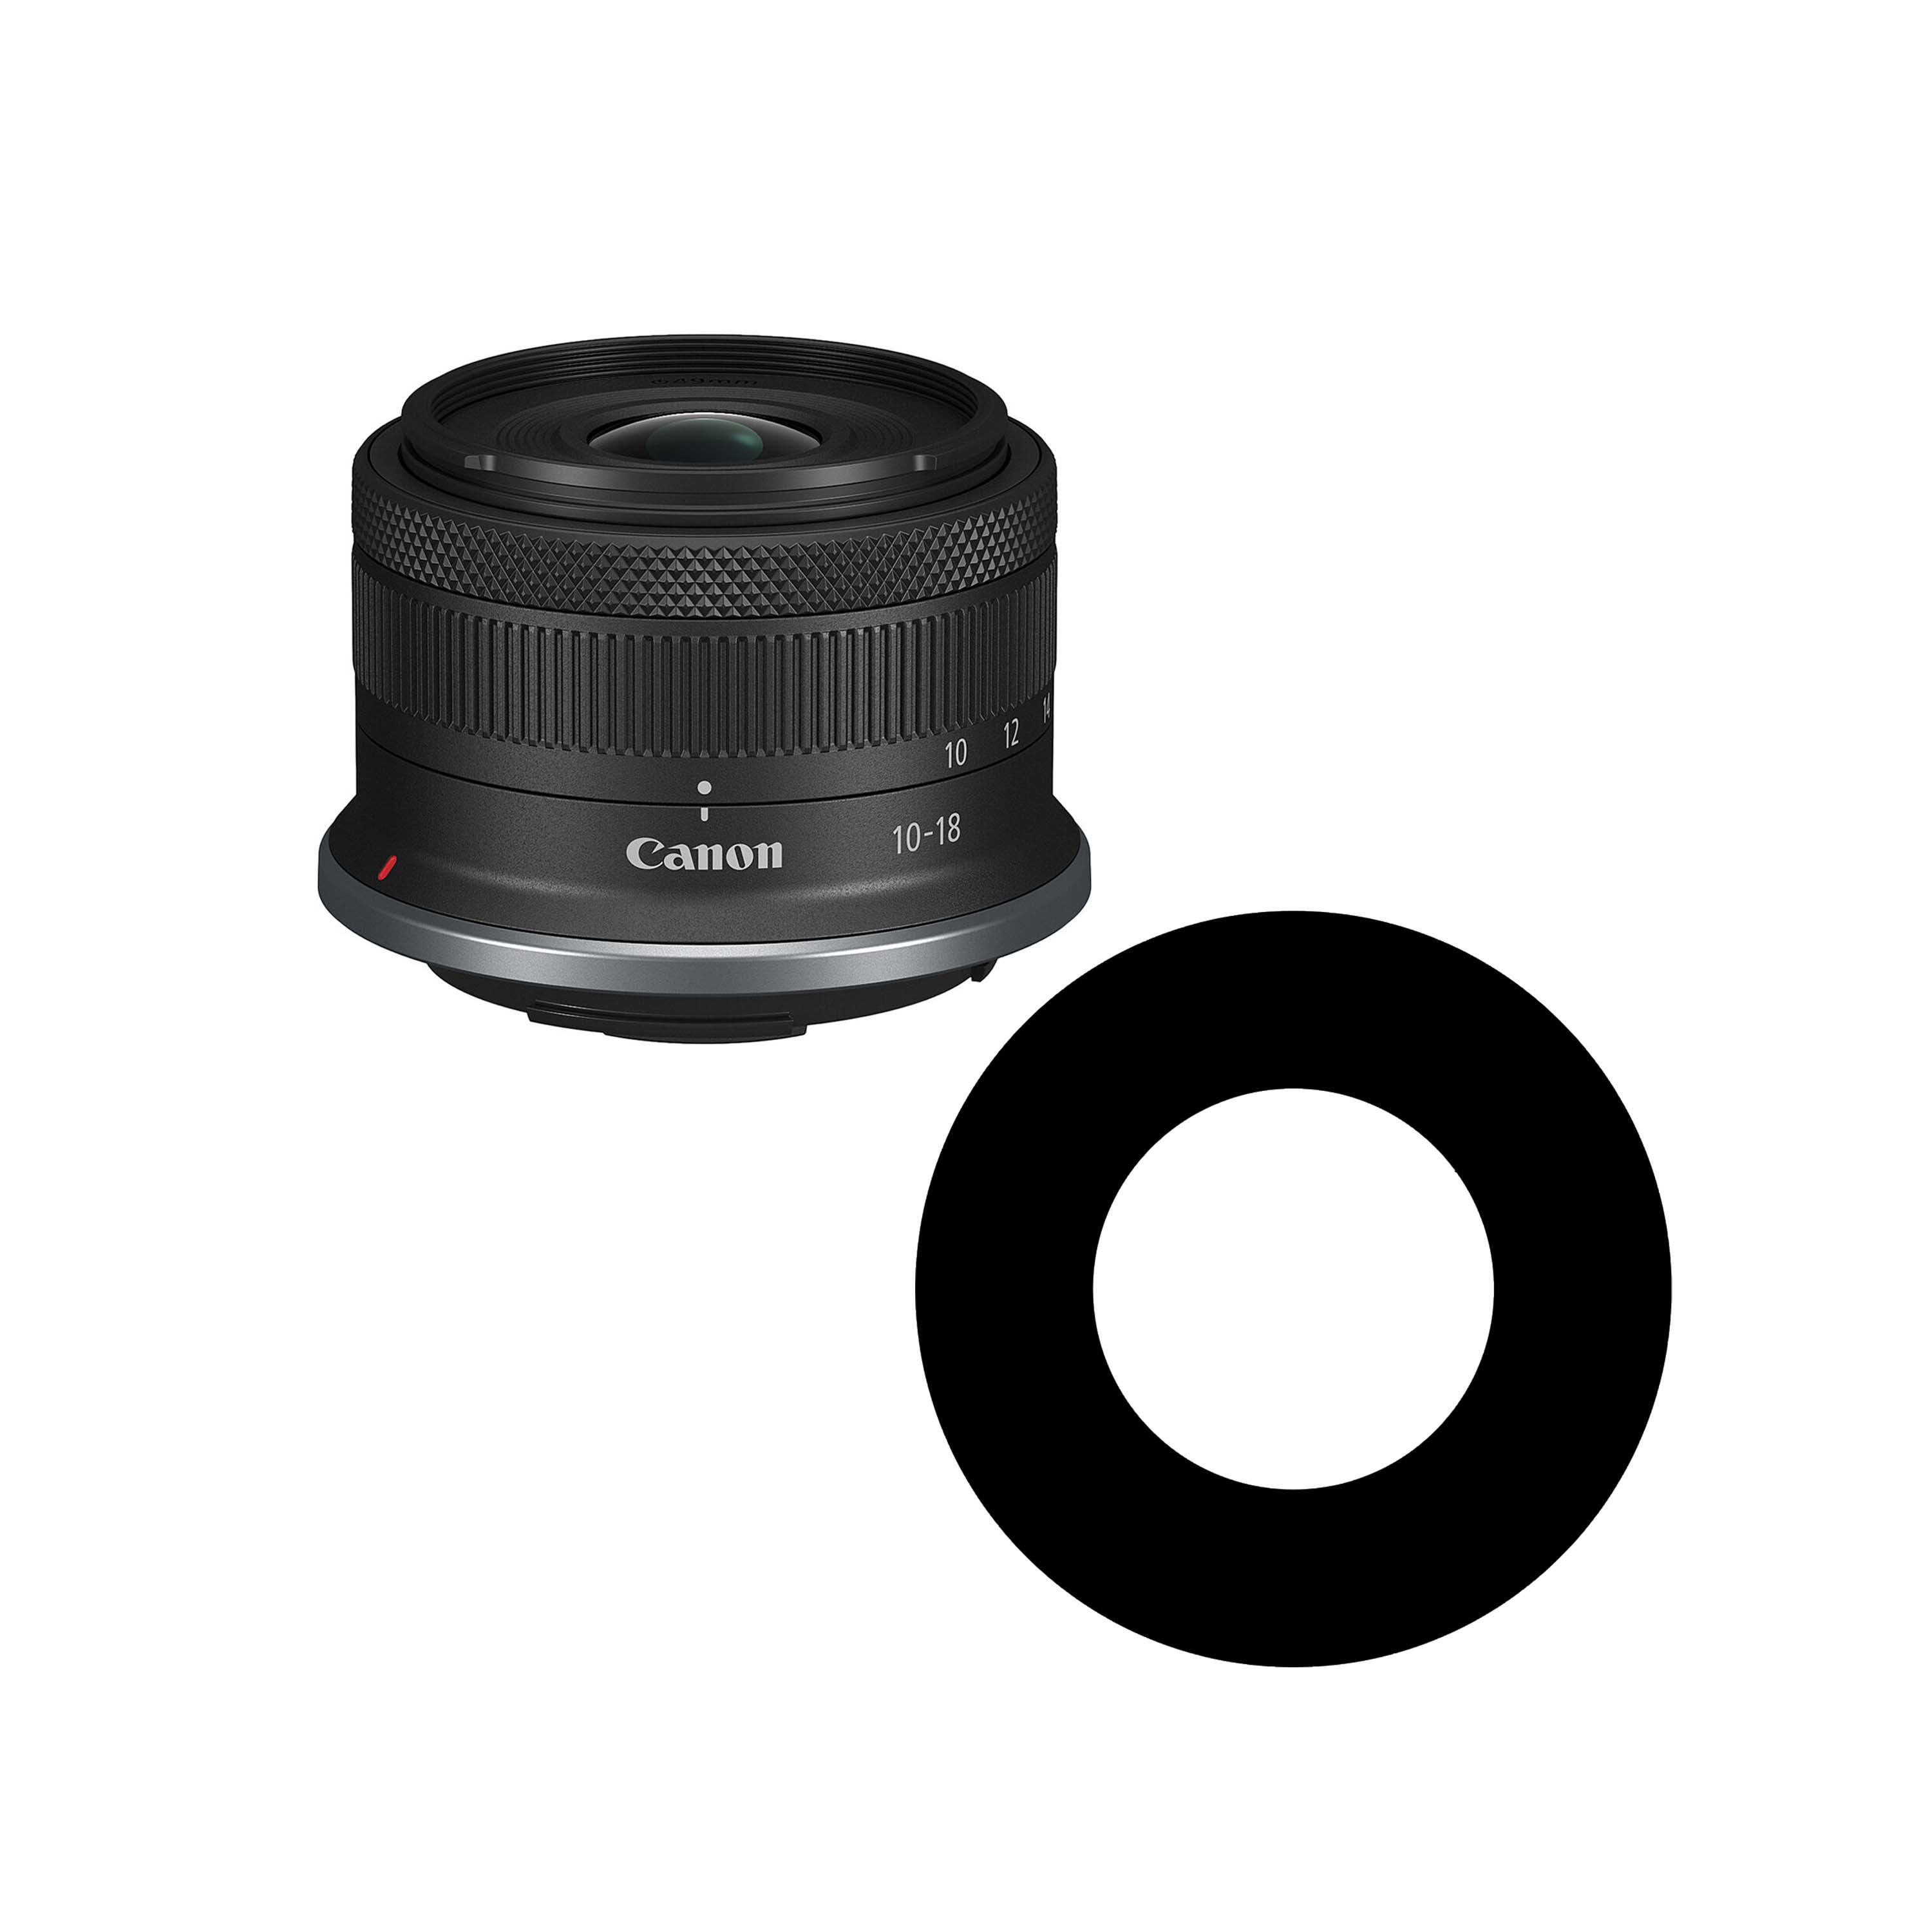 Ikelite Anti-Reflection Ring for Canon RF-S 10-18mm f/4.5-6.3 IS STM Lens